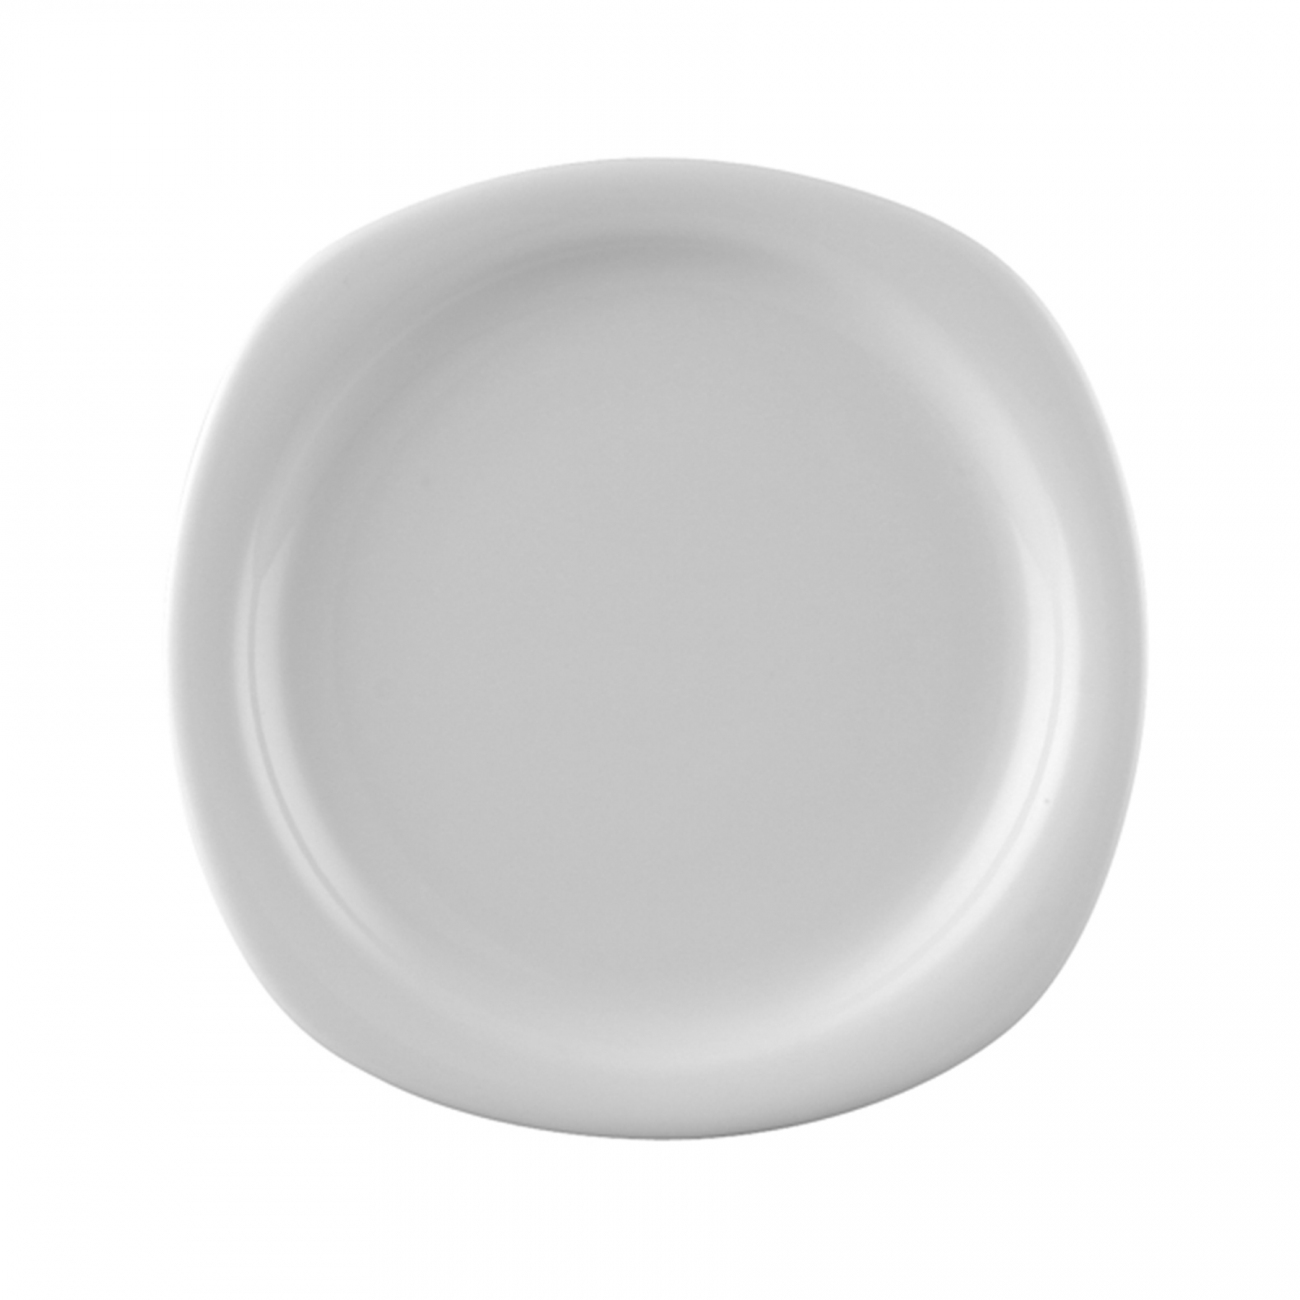 Rosenthal SUOMI Weiss Plate